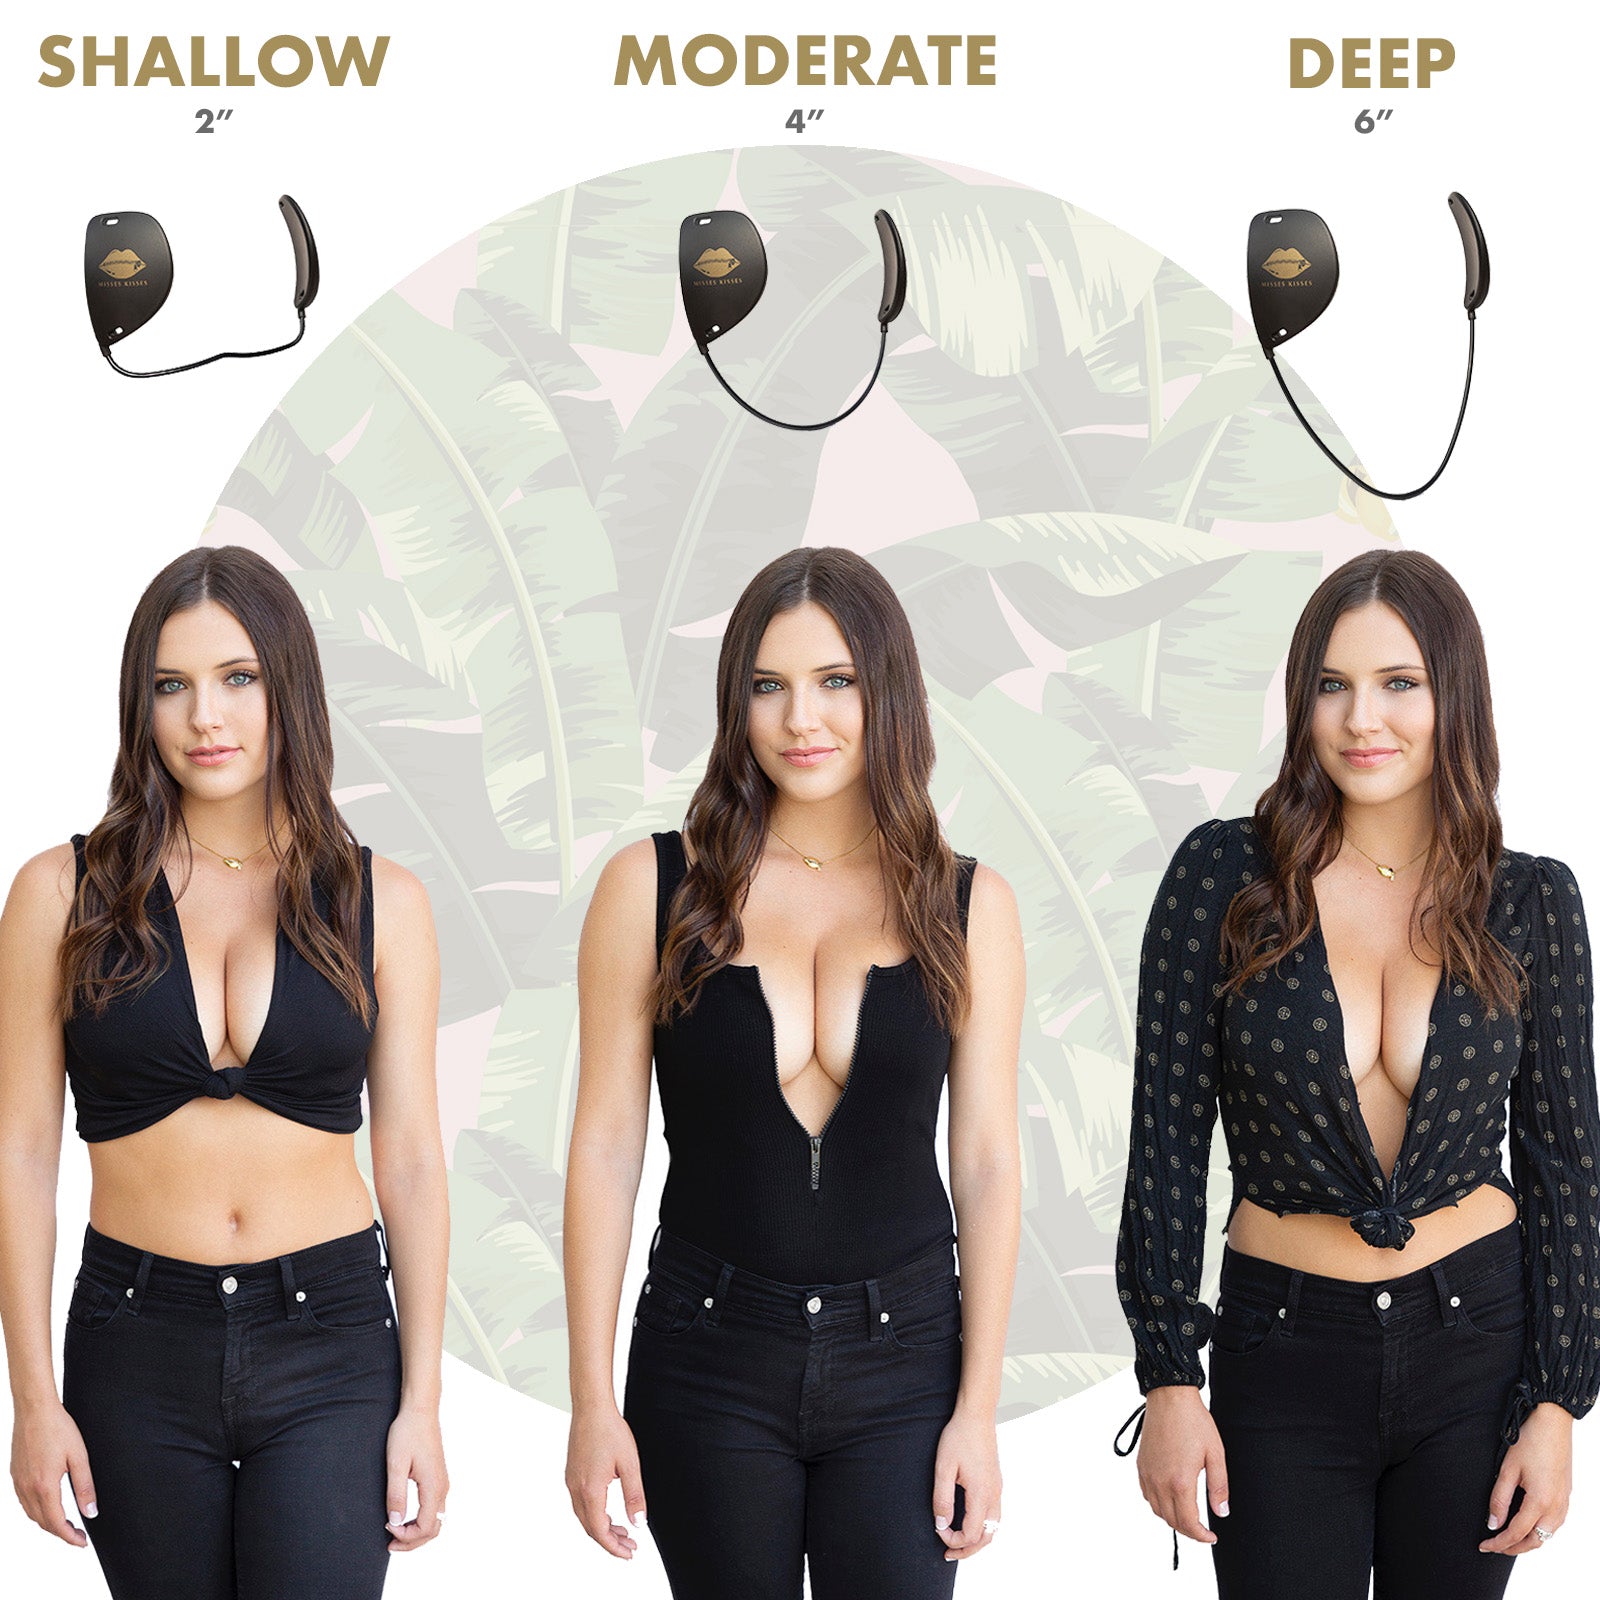 BUILD-A-BRA KIT  Achieve your dream cleavage and support with Misses  Kisses – Misses Kisses: The Frontless Bra